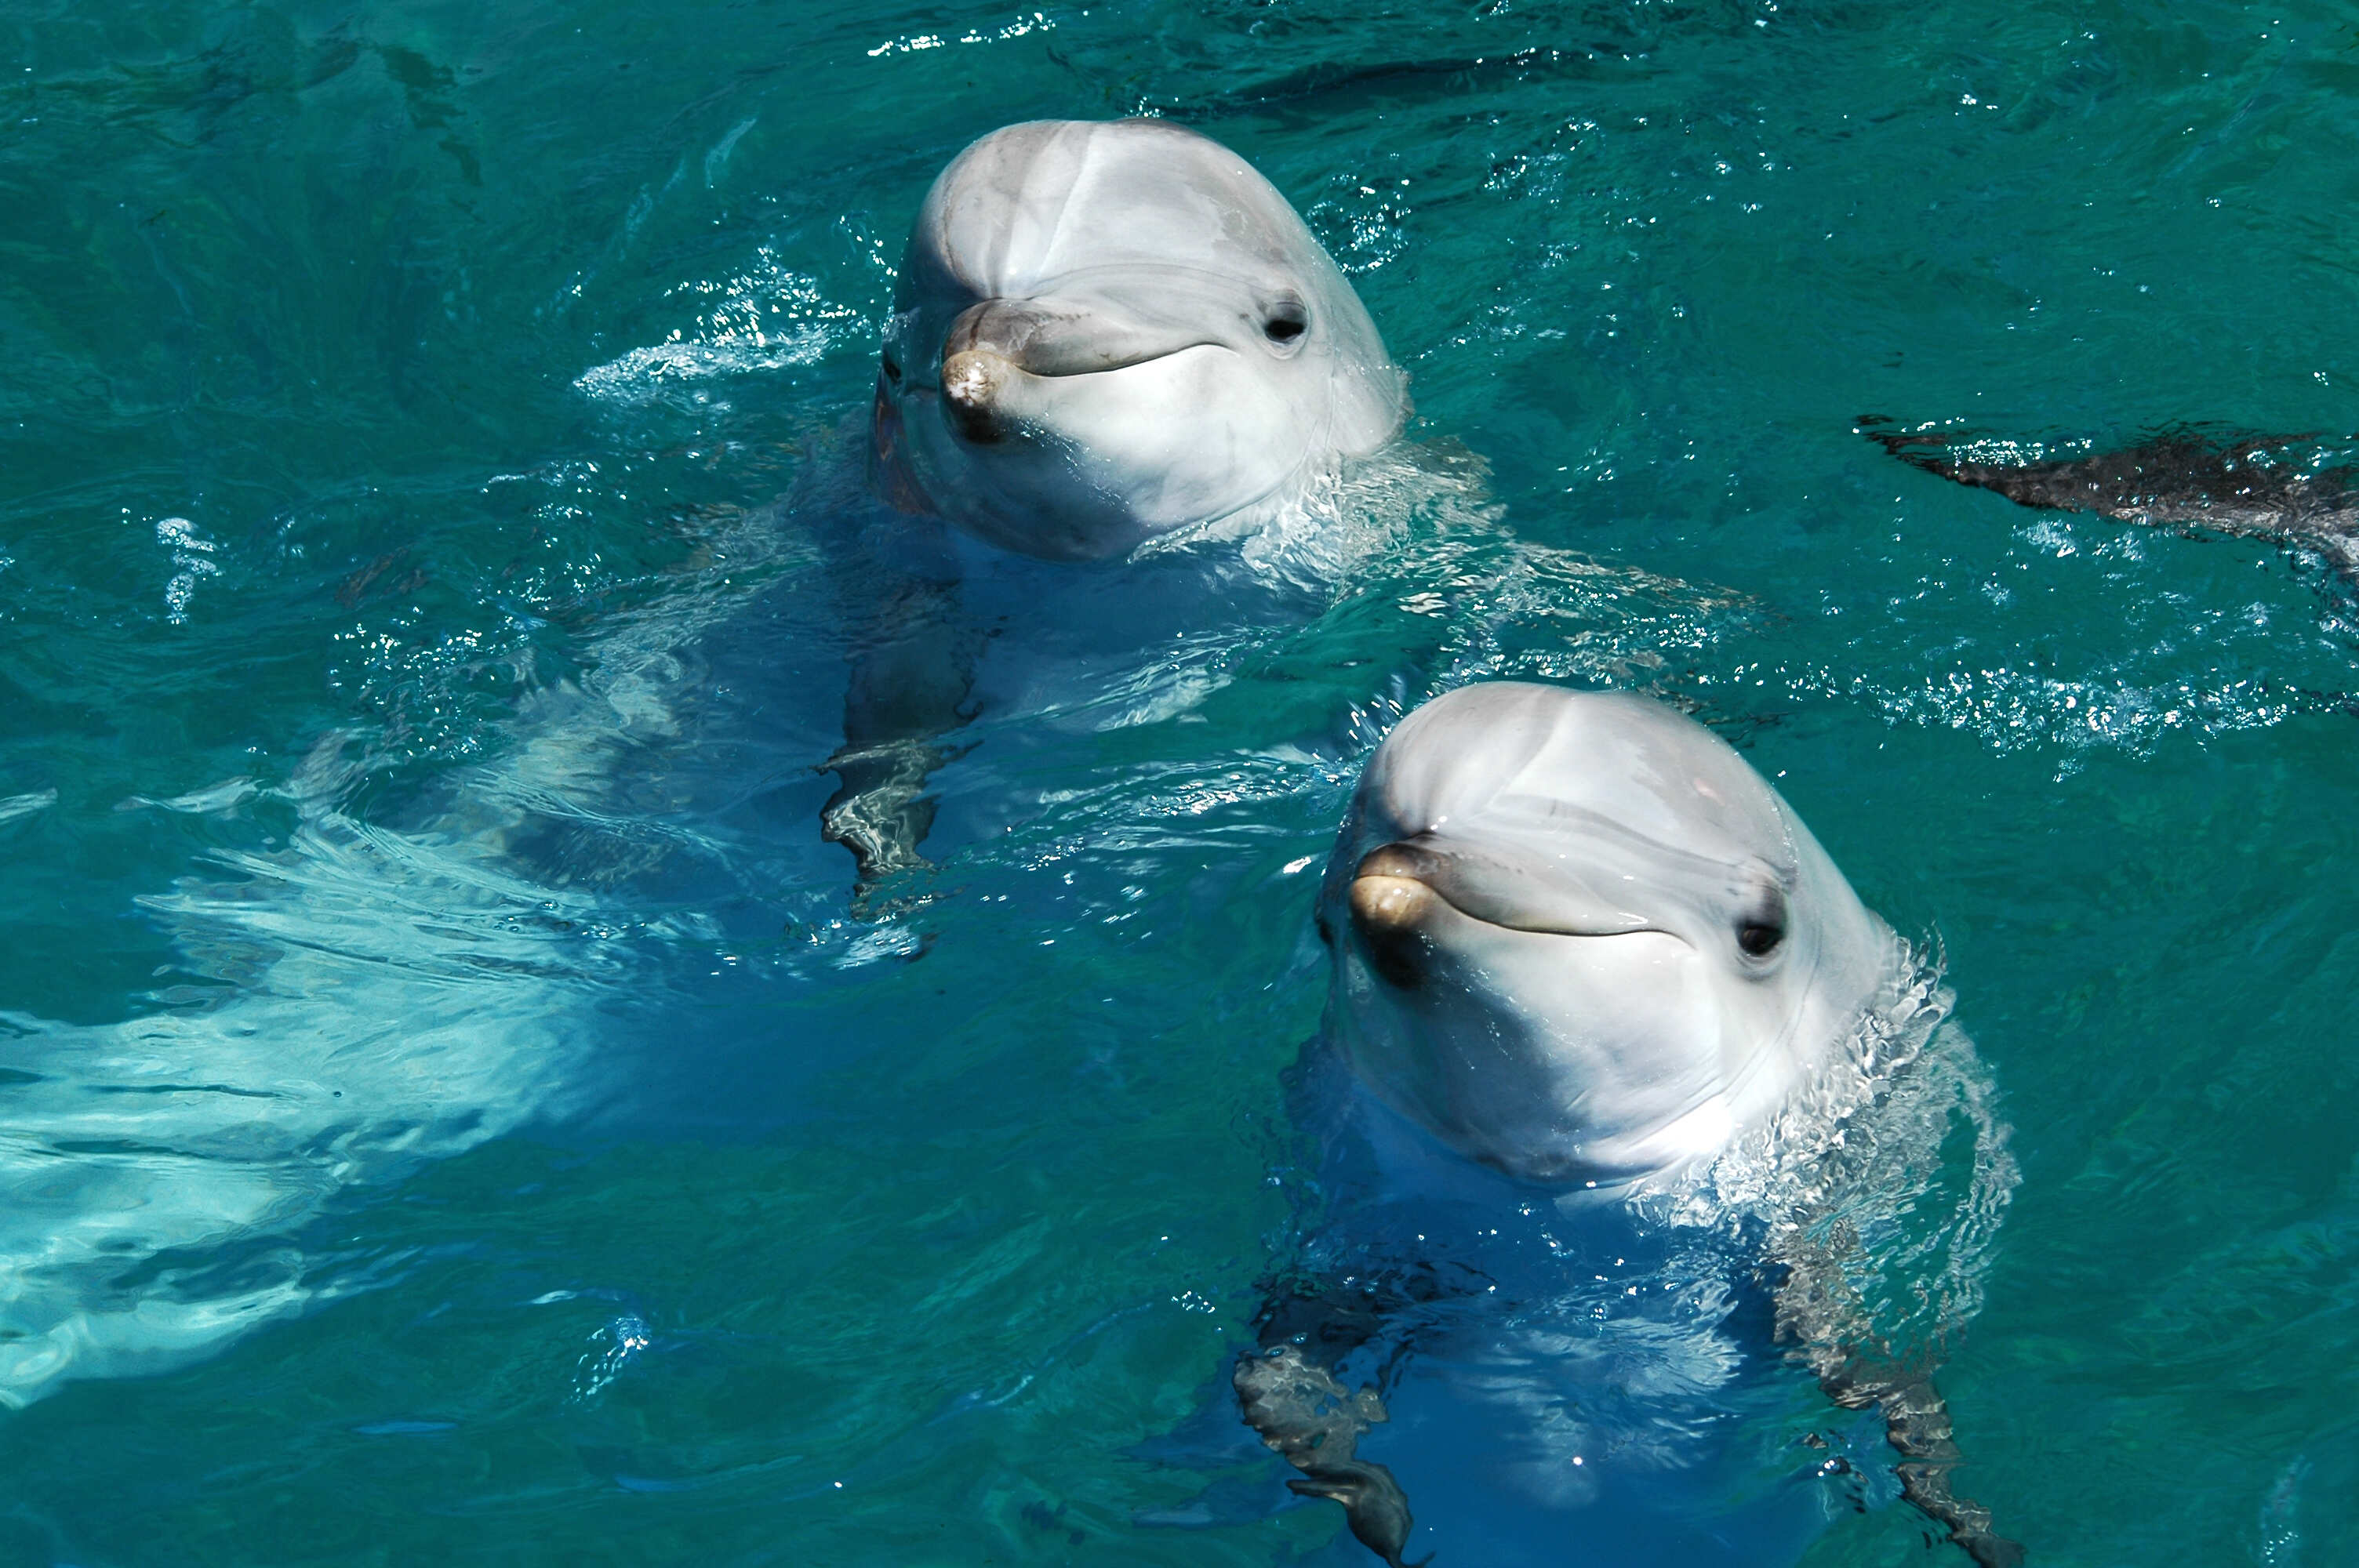 Two dolphins poking their heads out of water.